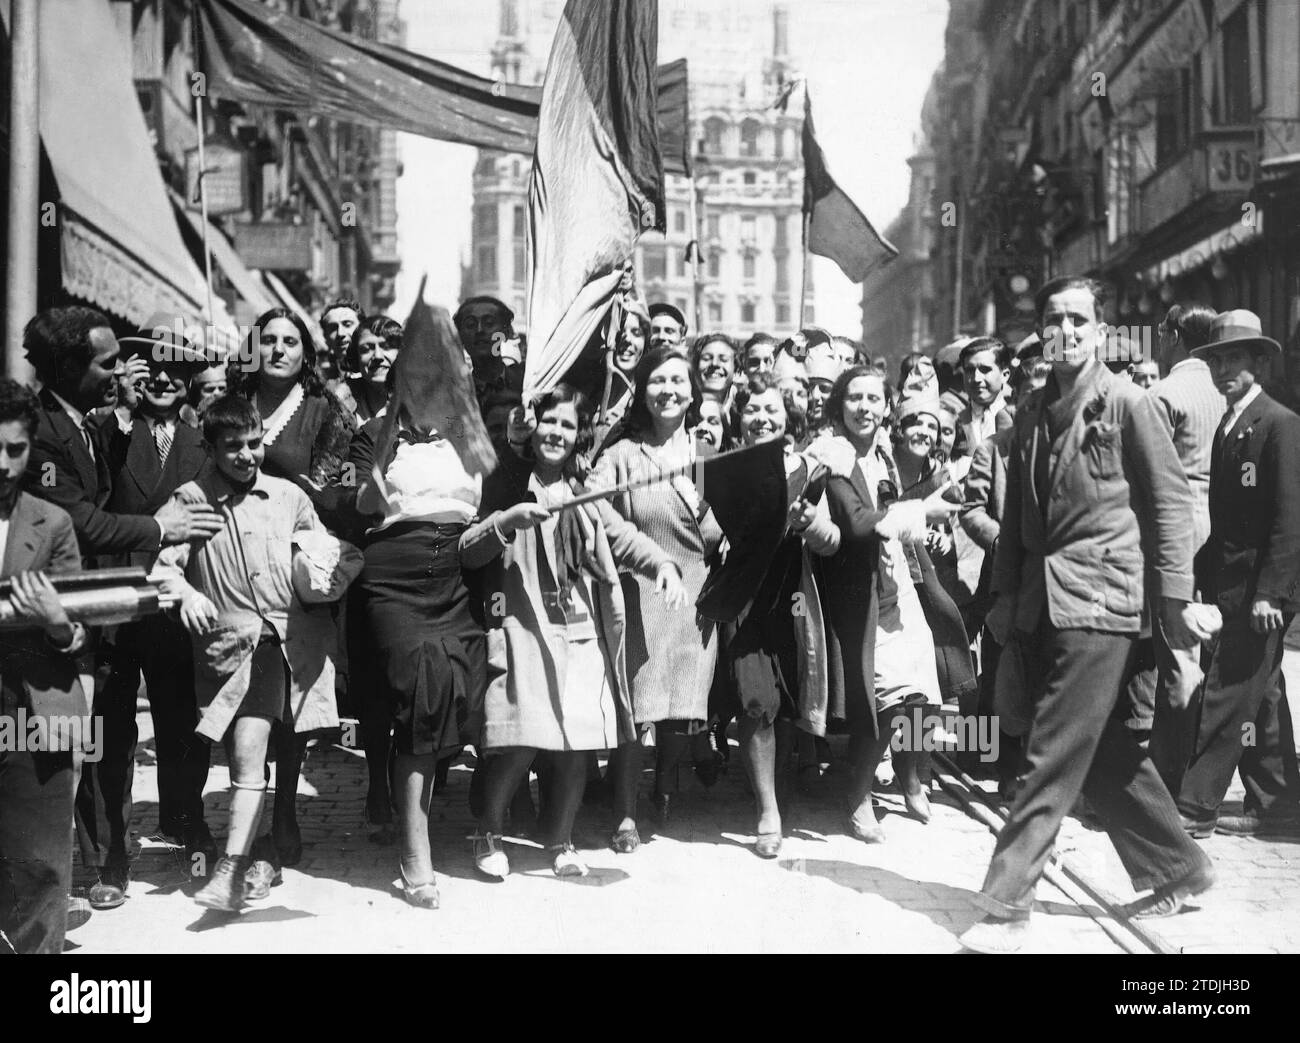 Madrid, 04/14/1931. Proclamation of the Second Republic. In the image, a group of workers carrying the tricolor flags in their hands. Credit: Album / Archivo ABC / Alfonso Stock Photo